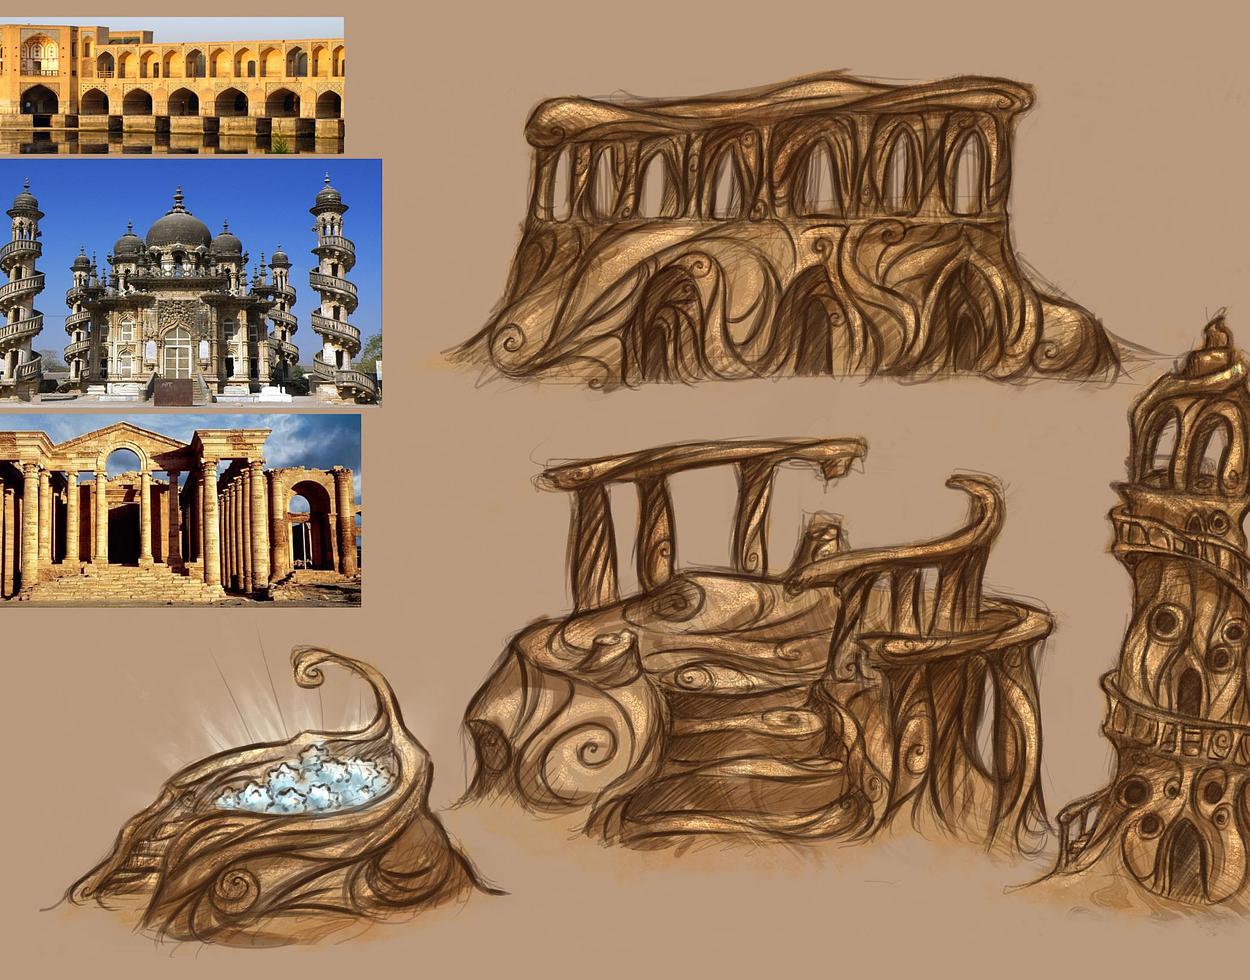 Earlier designs for Architecture which can be found on the islands, though they have been altered slightly. Their design is based on Persian Architecture.